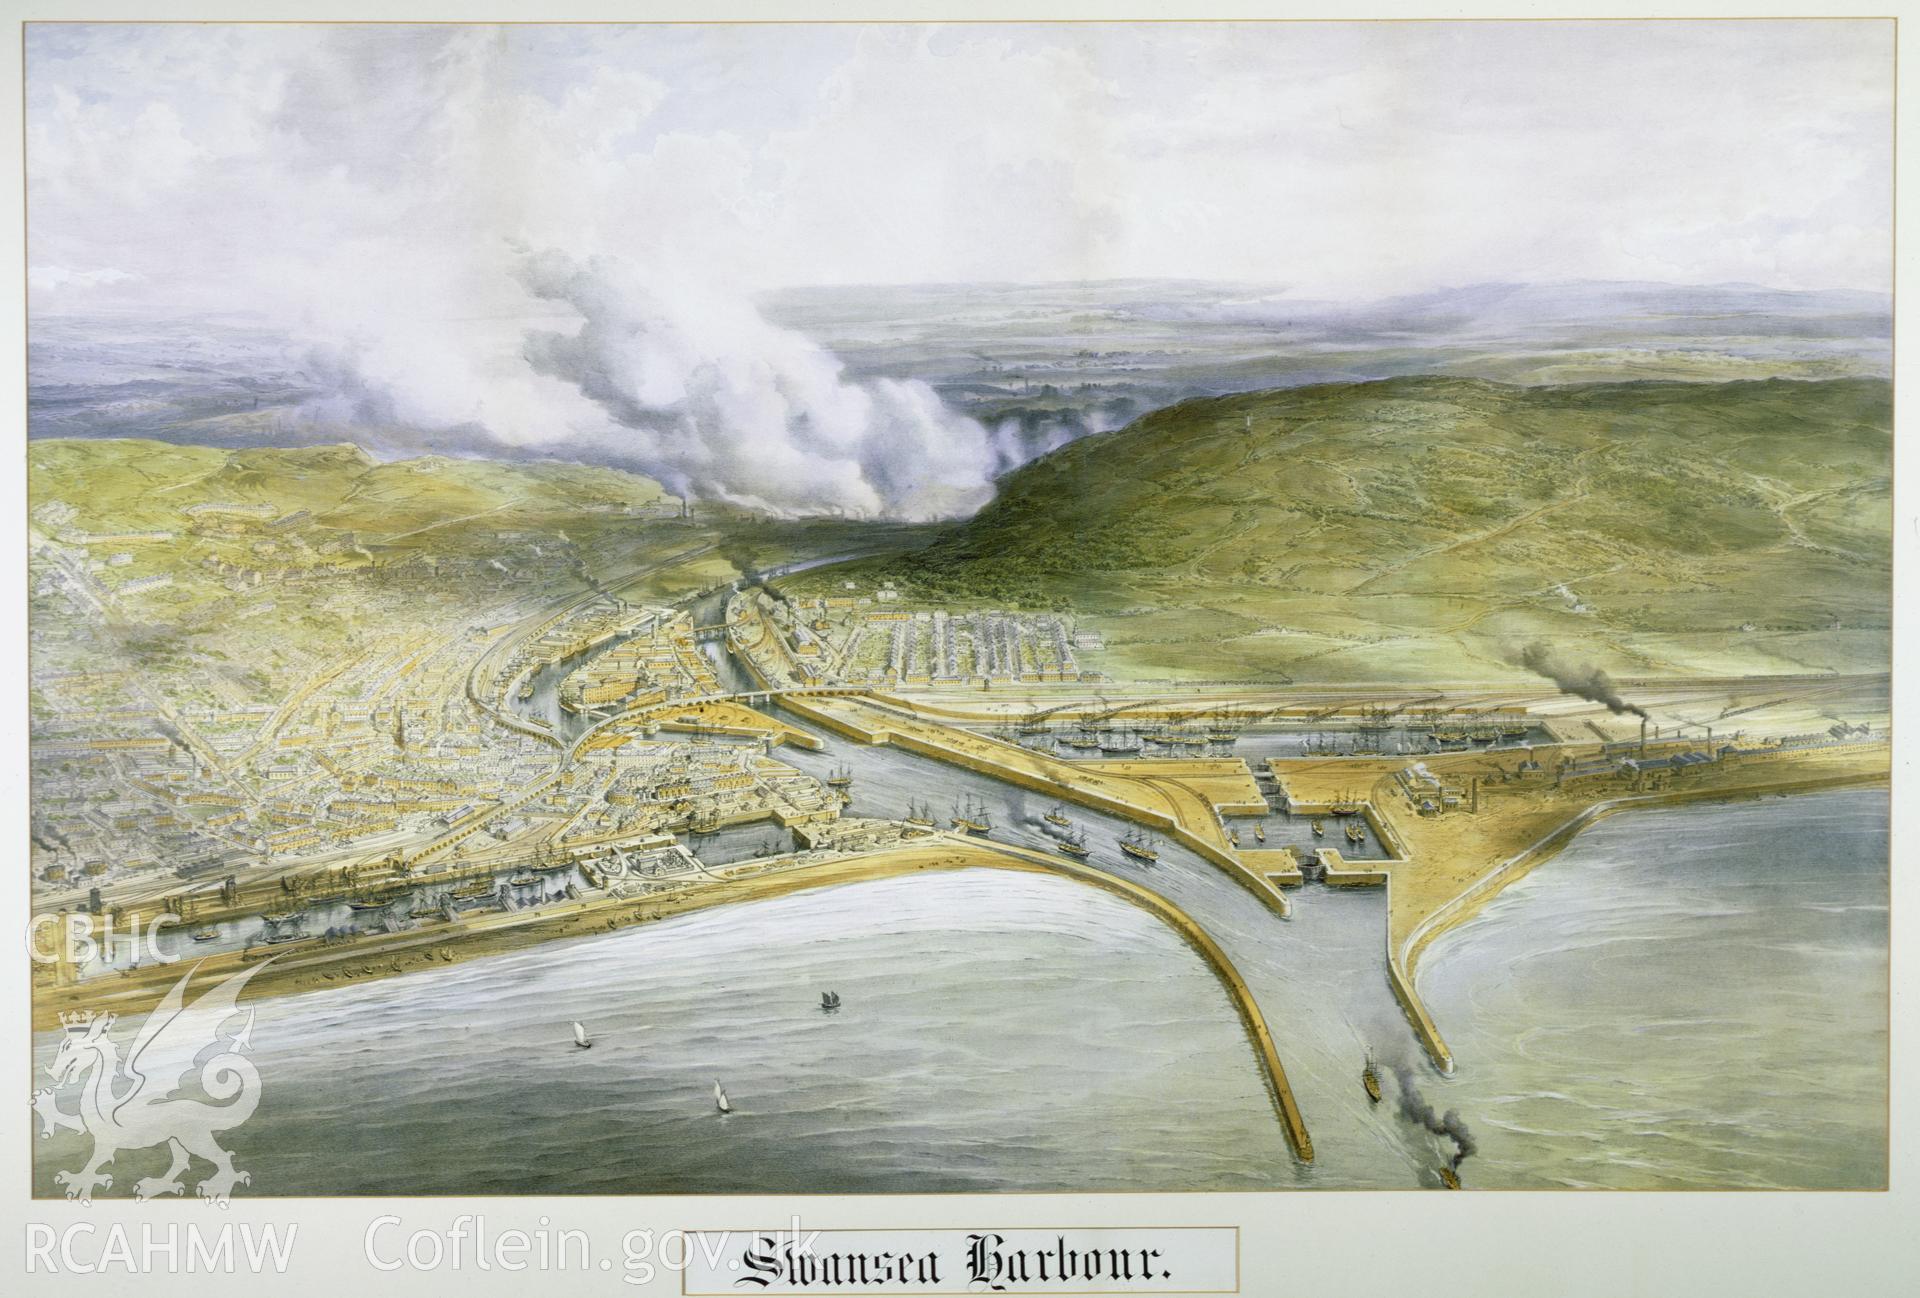 RCAHMW colour transparency of an 1851 lithograph showing Swansea Harbour, photographed by Iain Wright.